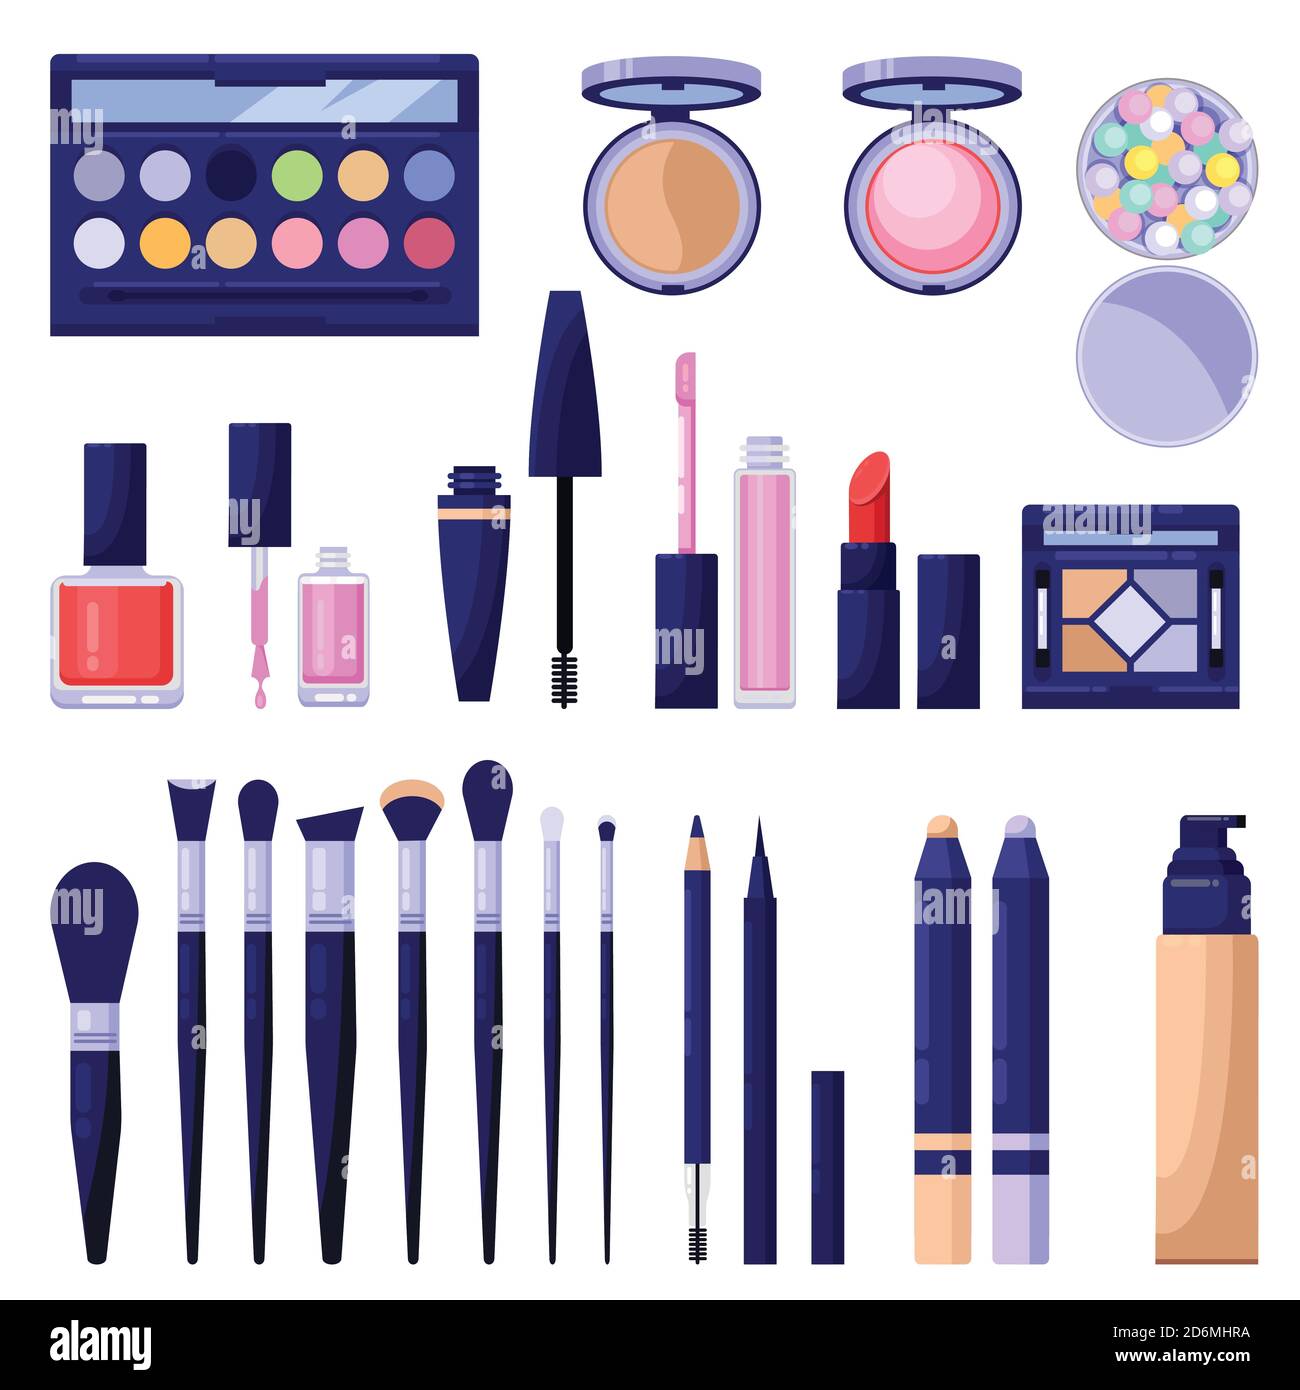 Makeup cosmetics colorful icons and vector design elements. Eyes, face, lips beauty and care products isolated on white background. Female fashion col Stock Vector